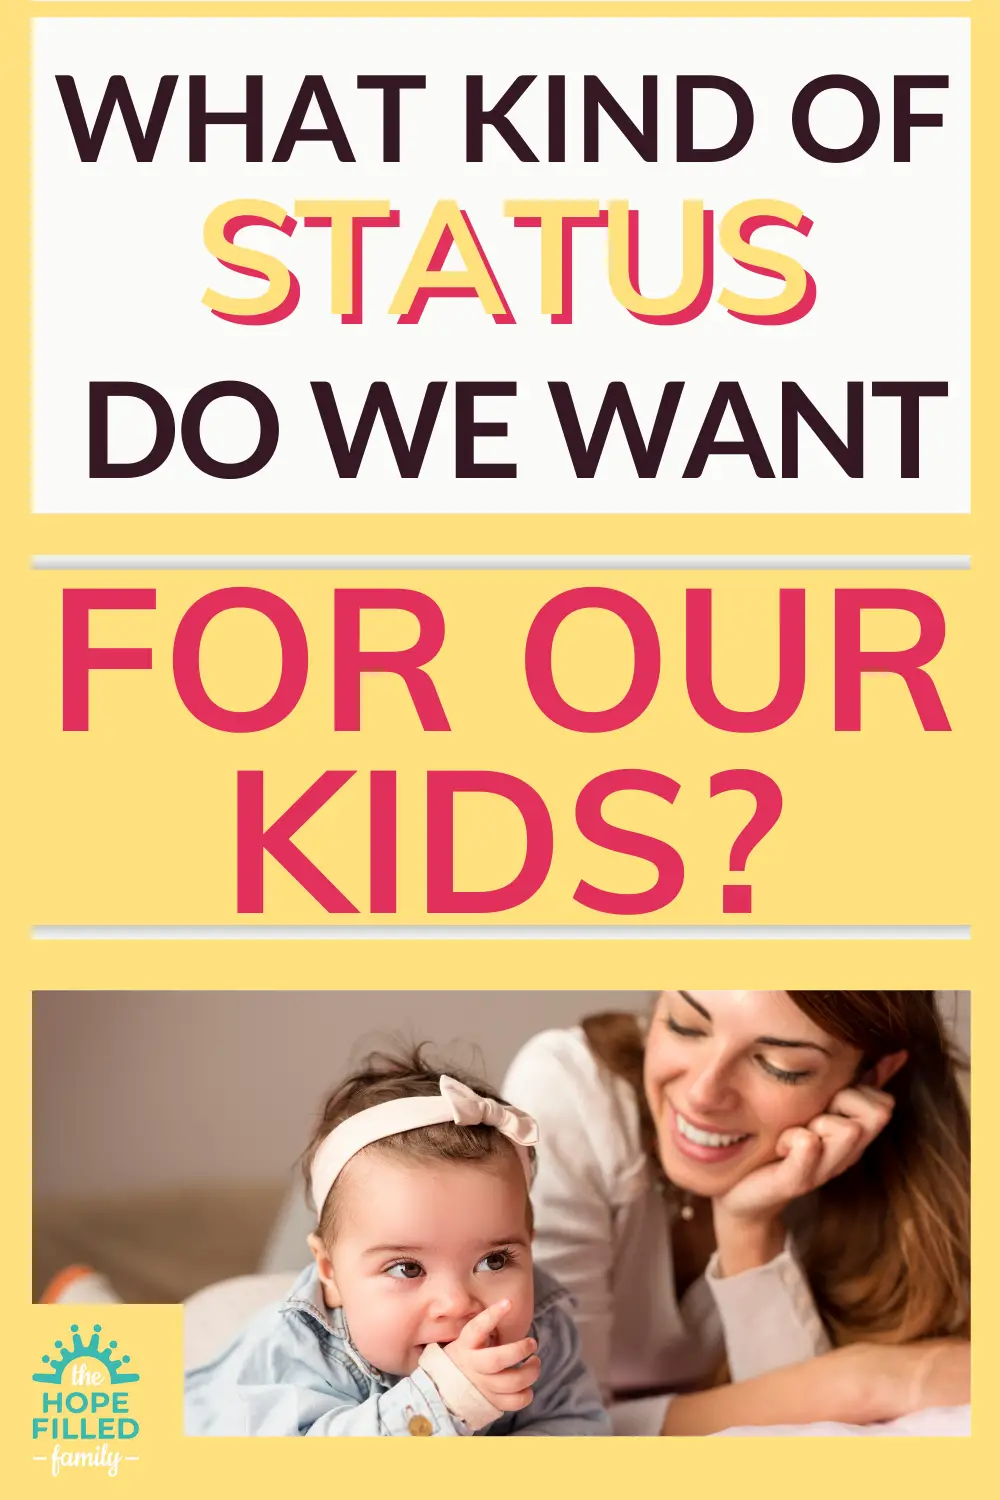 What kind of status do we want for kids? Are we more bothered by it than we're happy to admit?